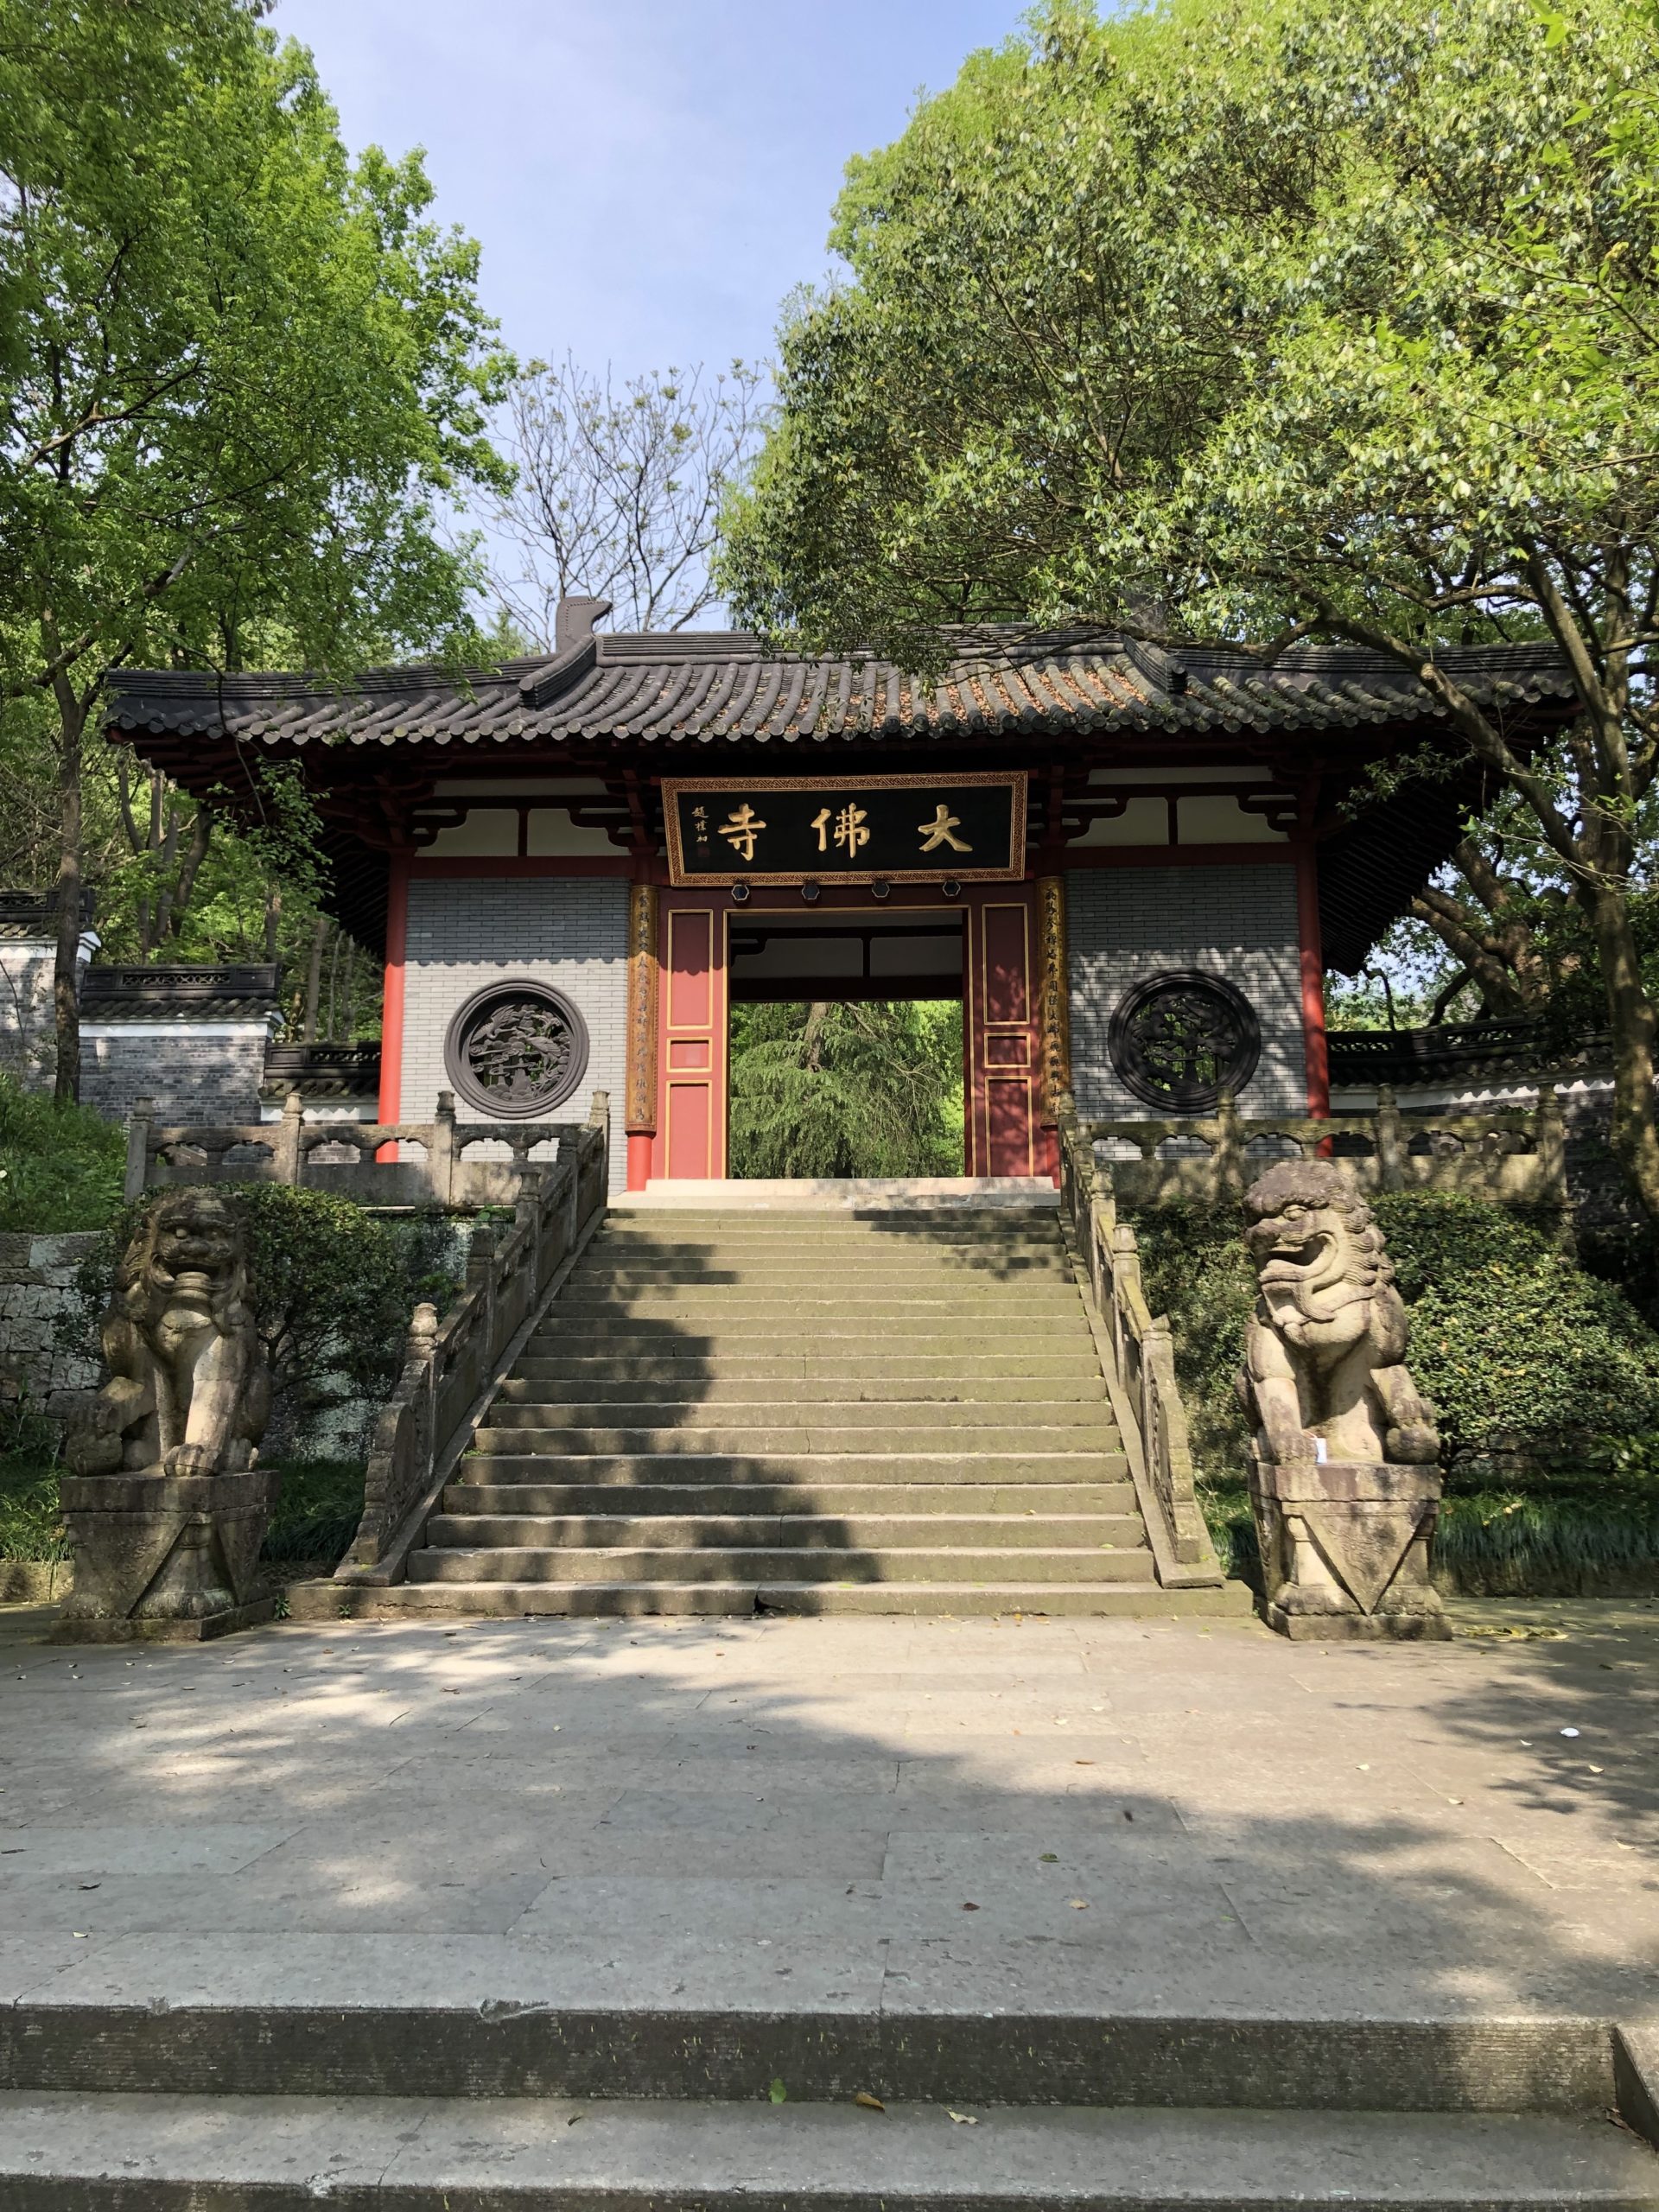 The entrance to Da Fo Temple in Zhejiang, with an angled roof over an outdoor archway.